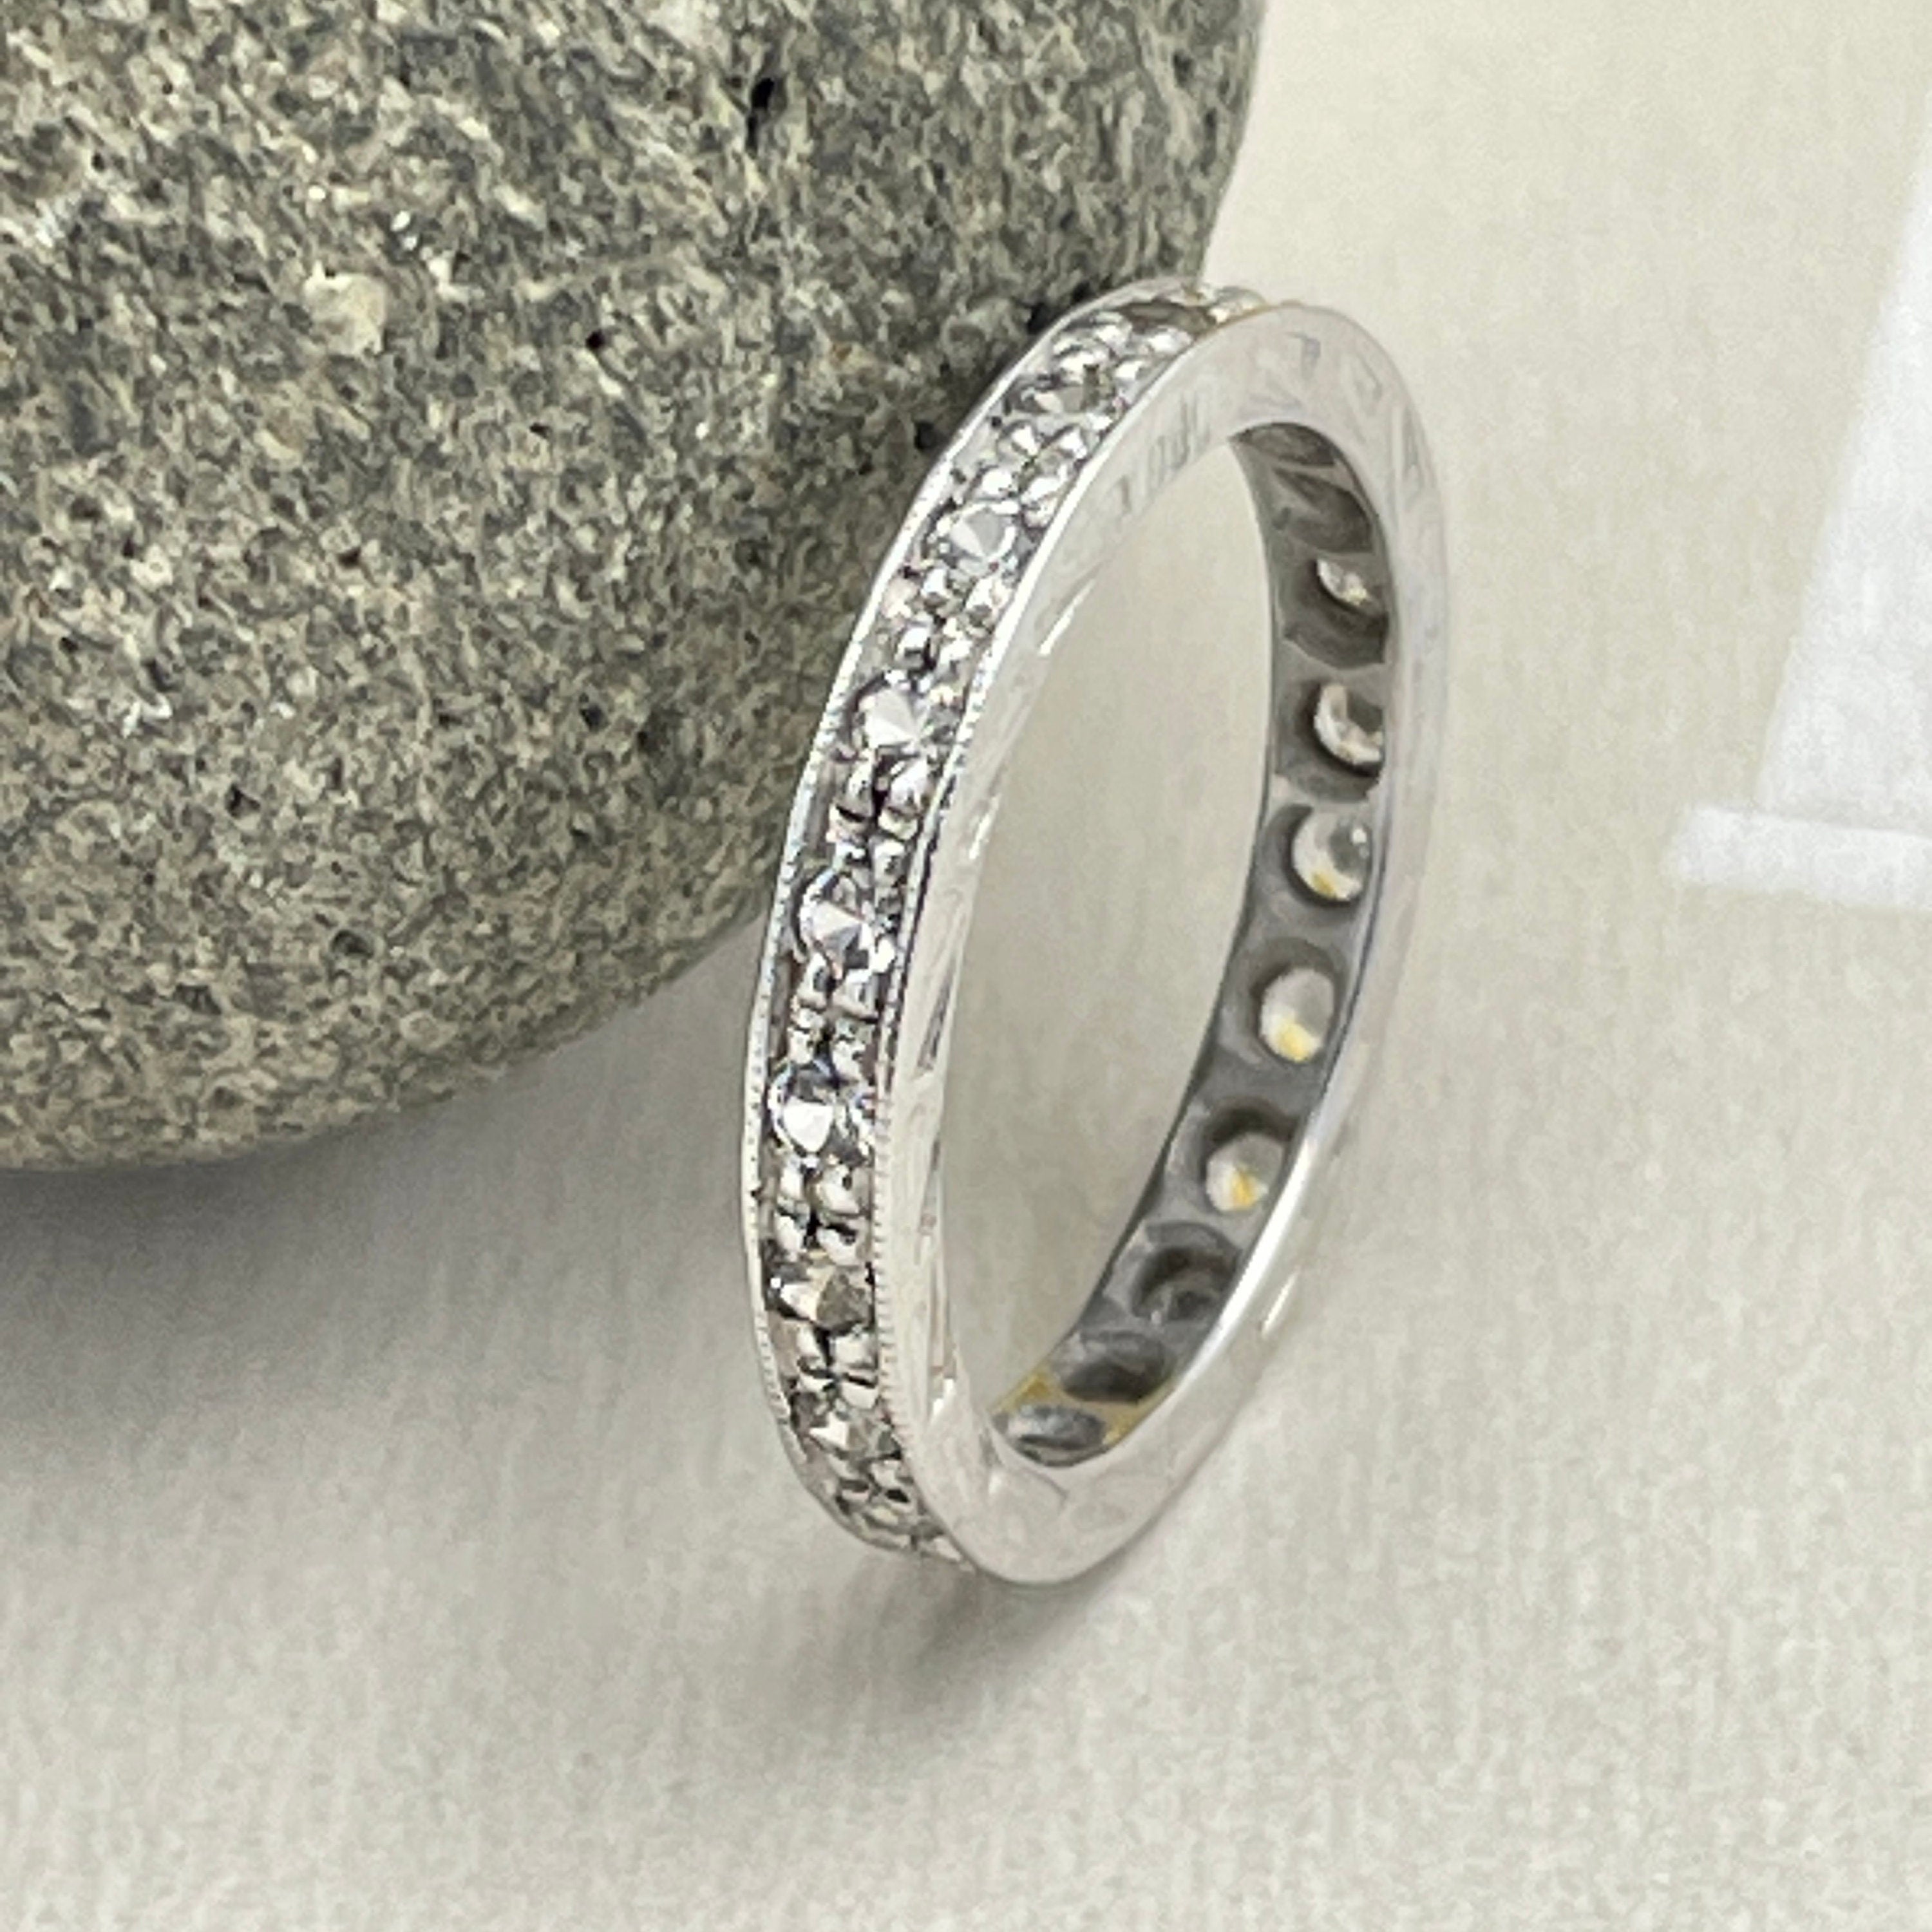 Art deco, 9ct white gold white topaz, etched eternity ring